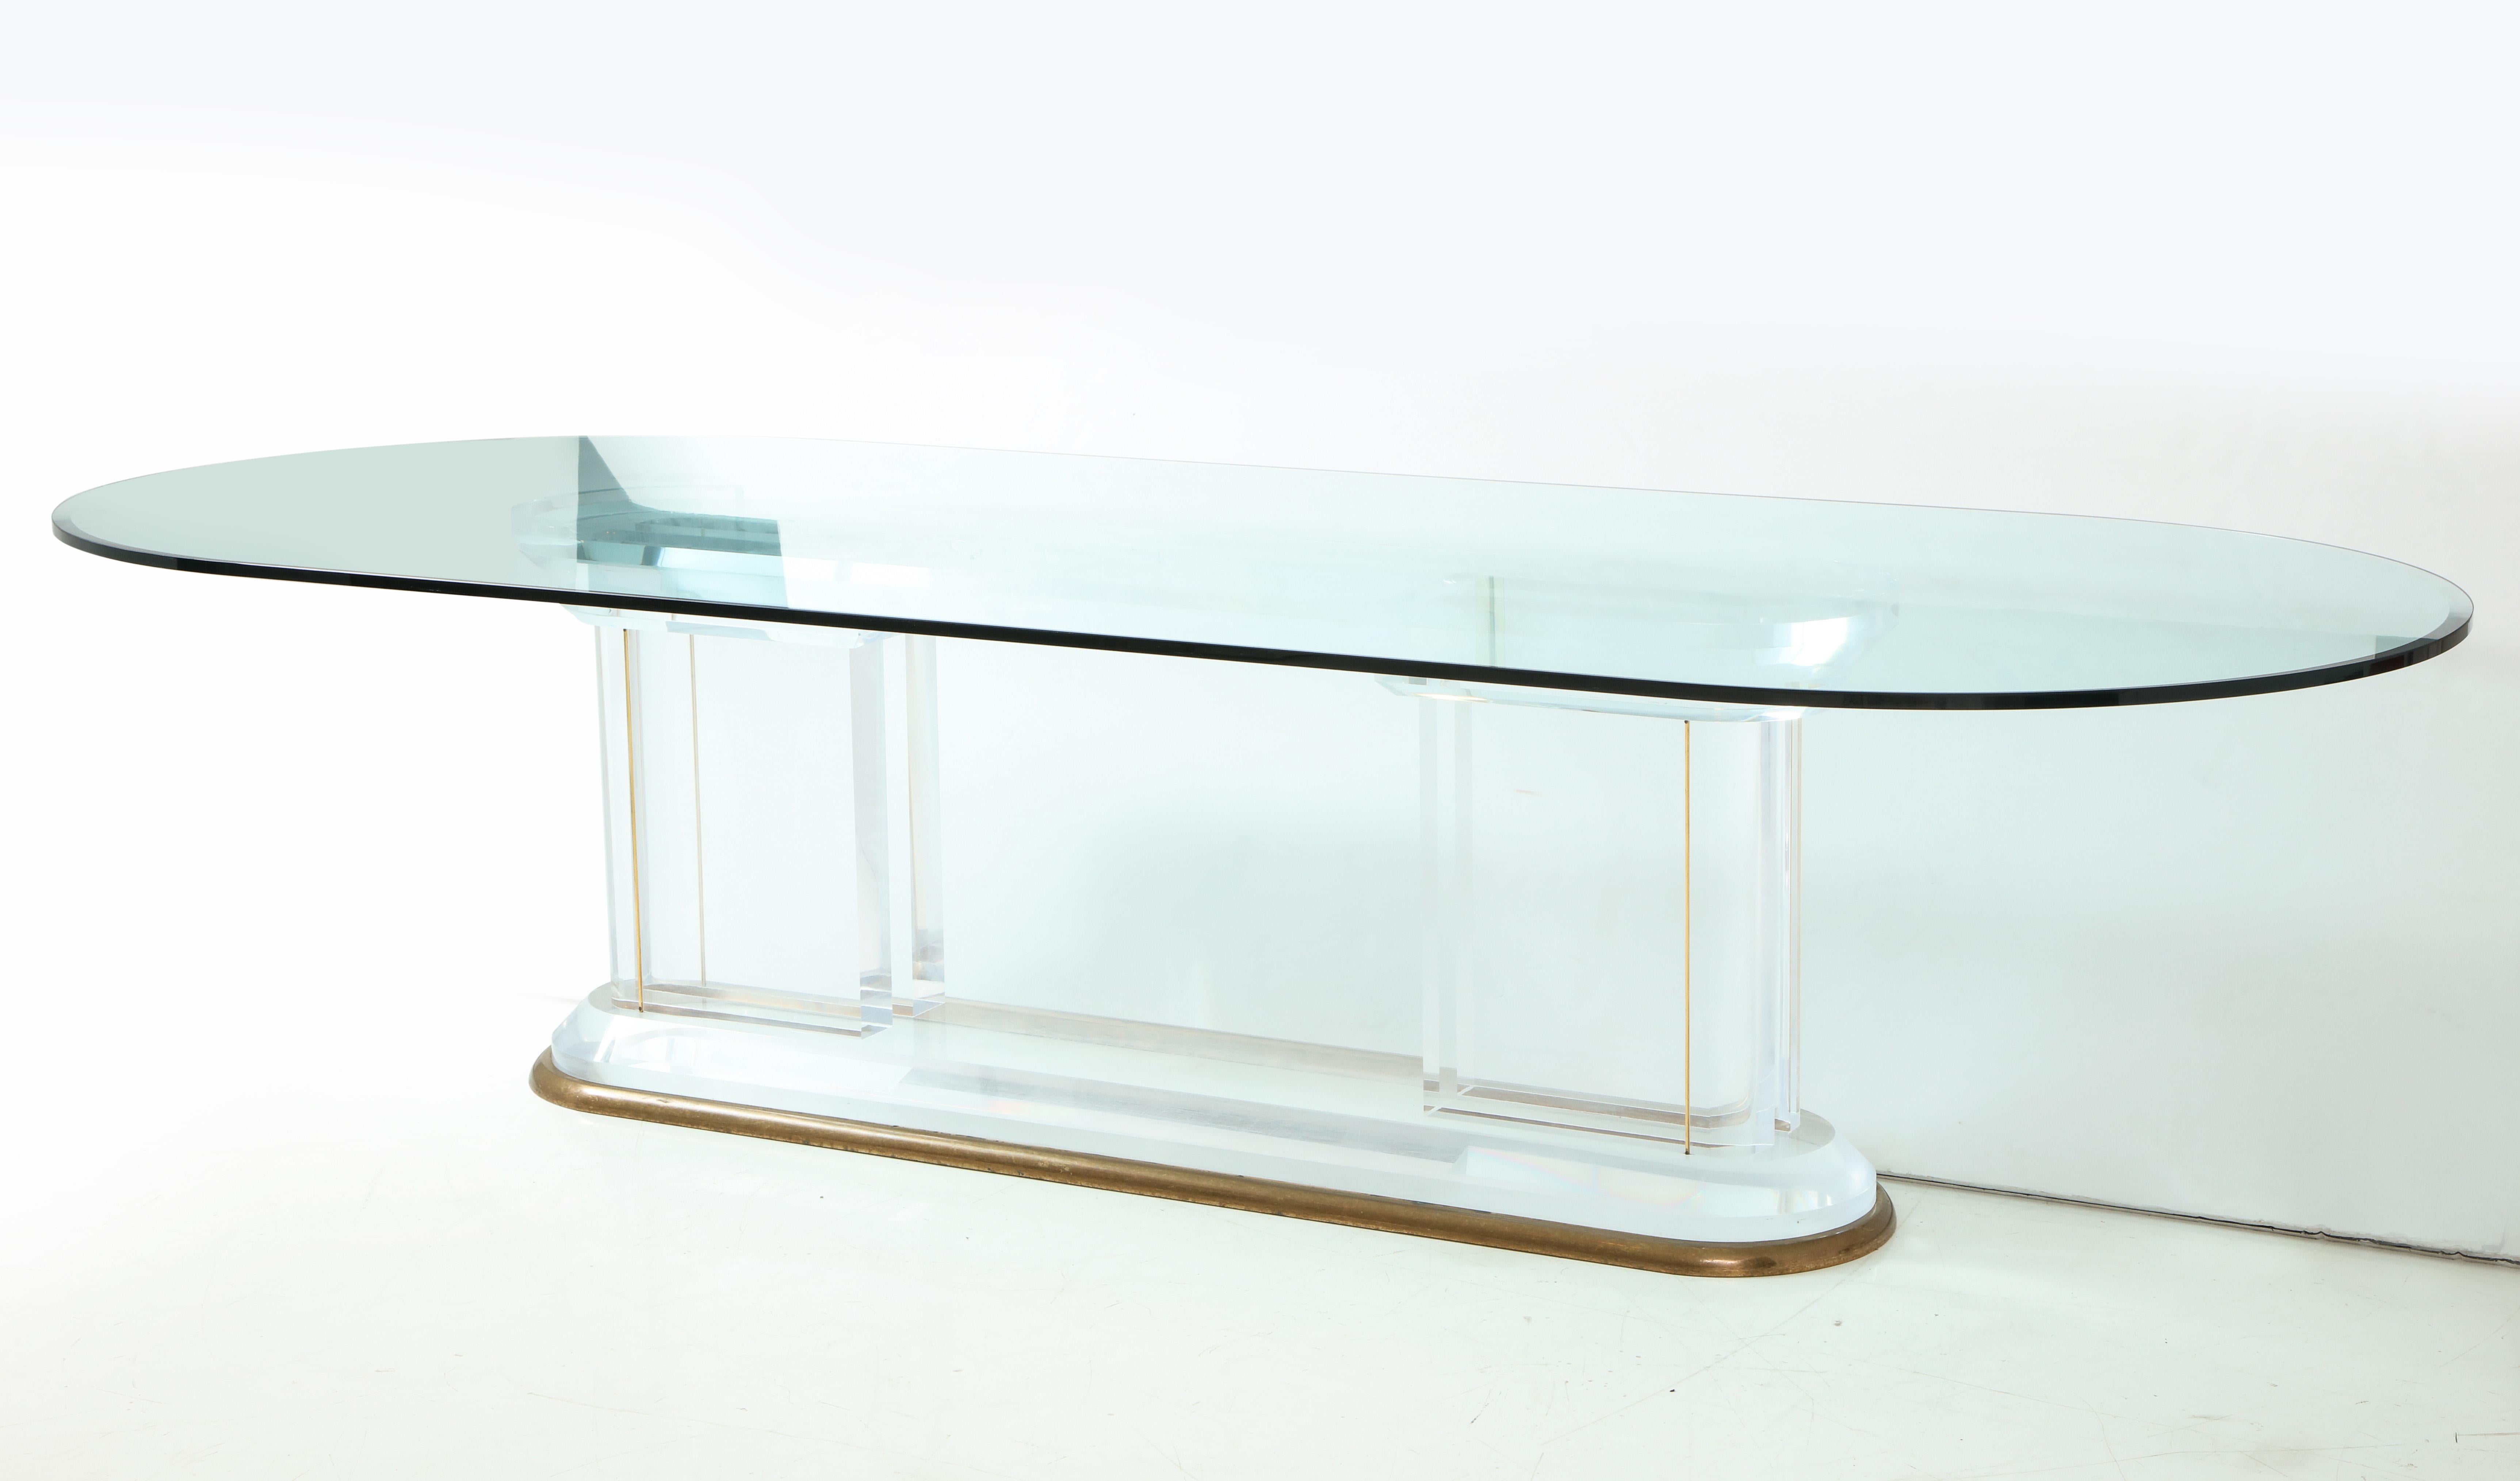 Spectacular AH Paragon dining table by Jeffrey Bigelow signed 1987.
Classical influenced Lucite columns on a bronze race track base which has a beautiful patina creates a stunning minimalist dining table.
The table supports a glass top which is 118